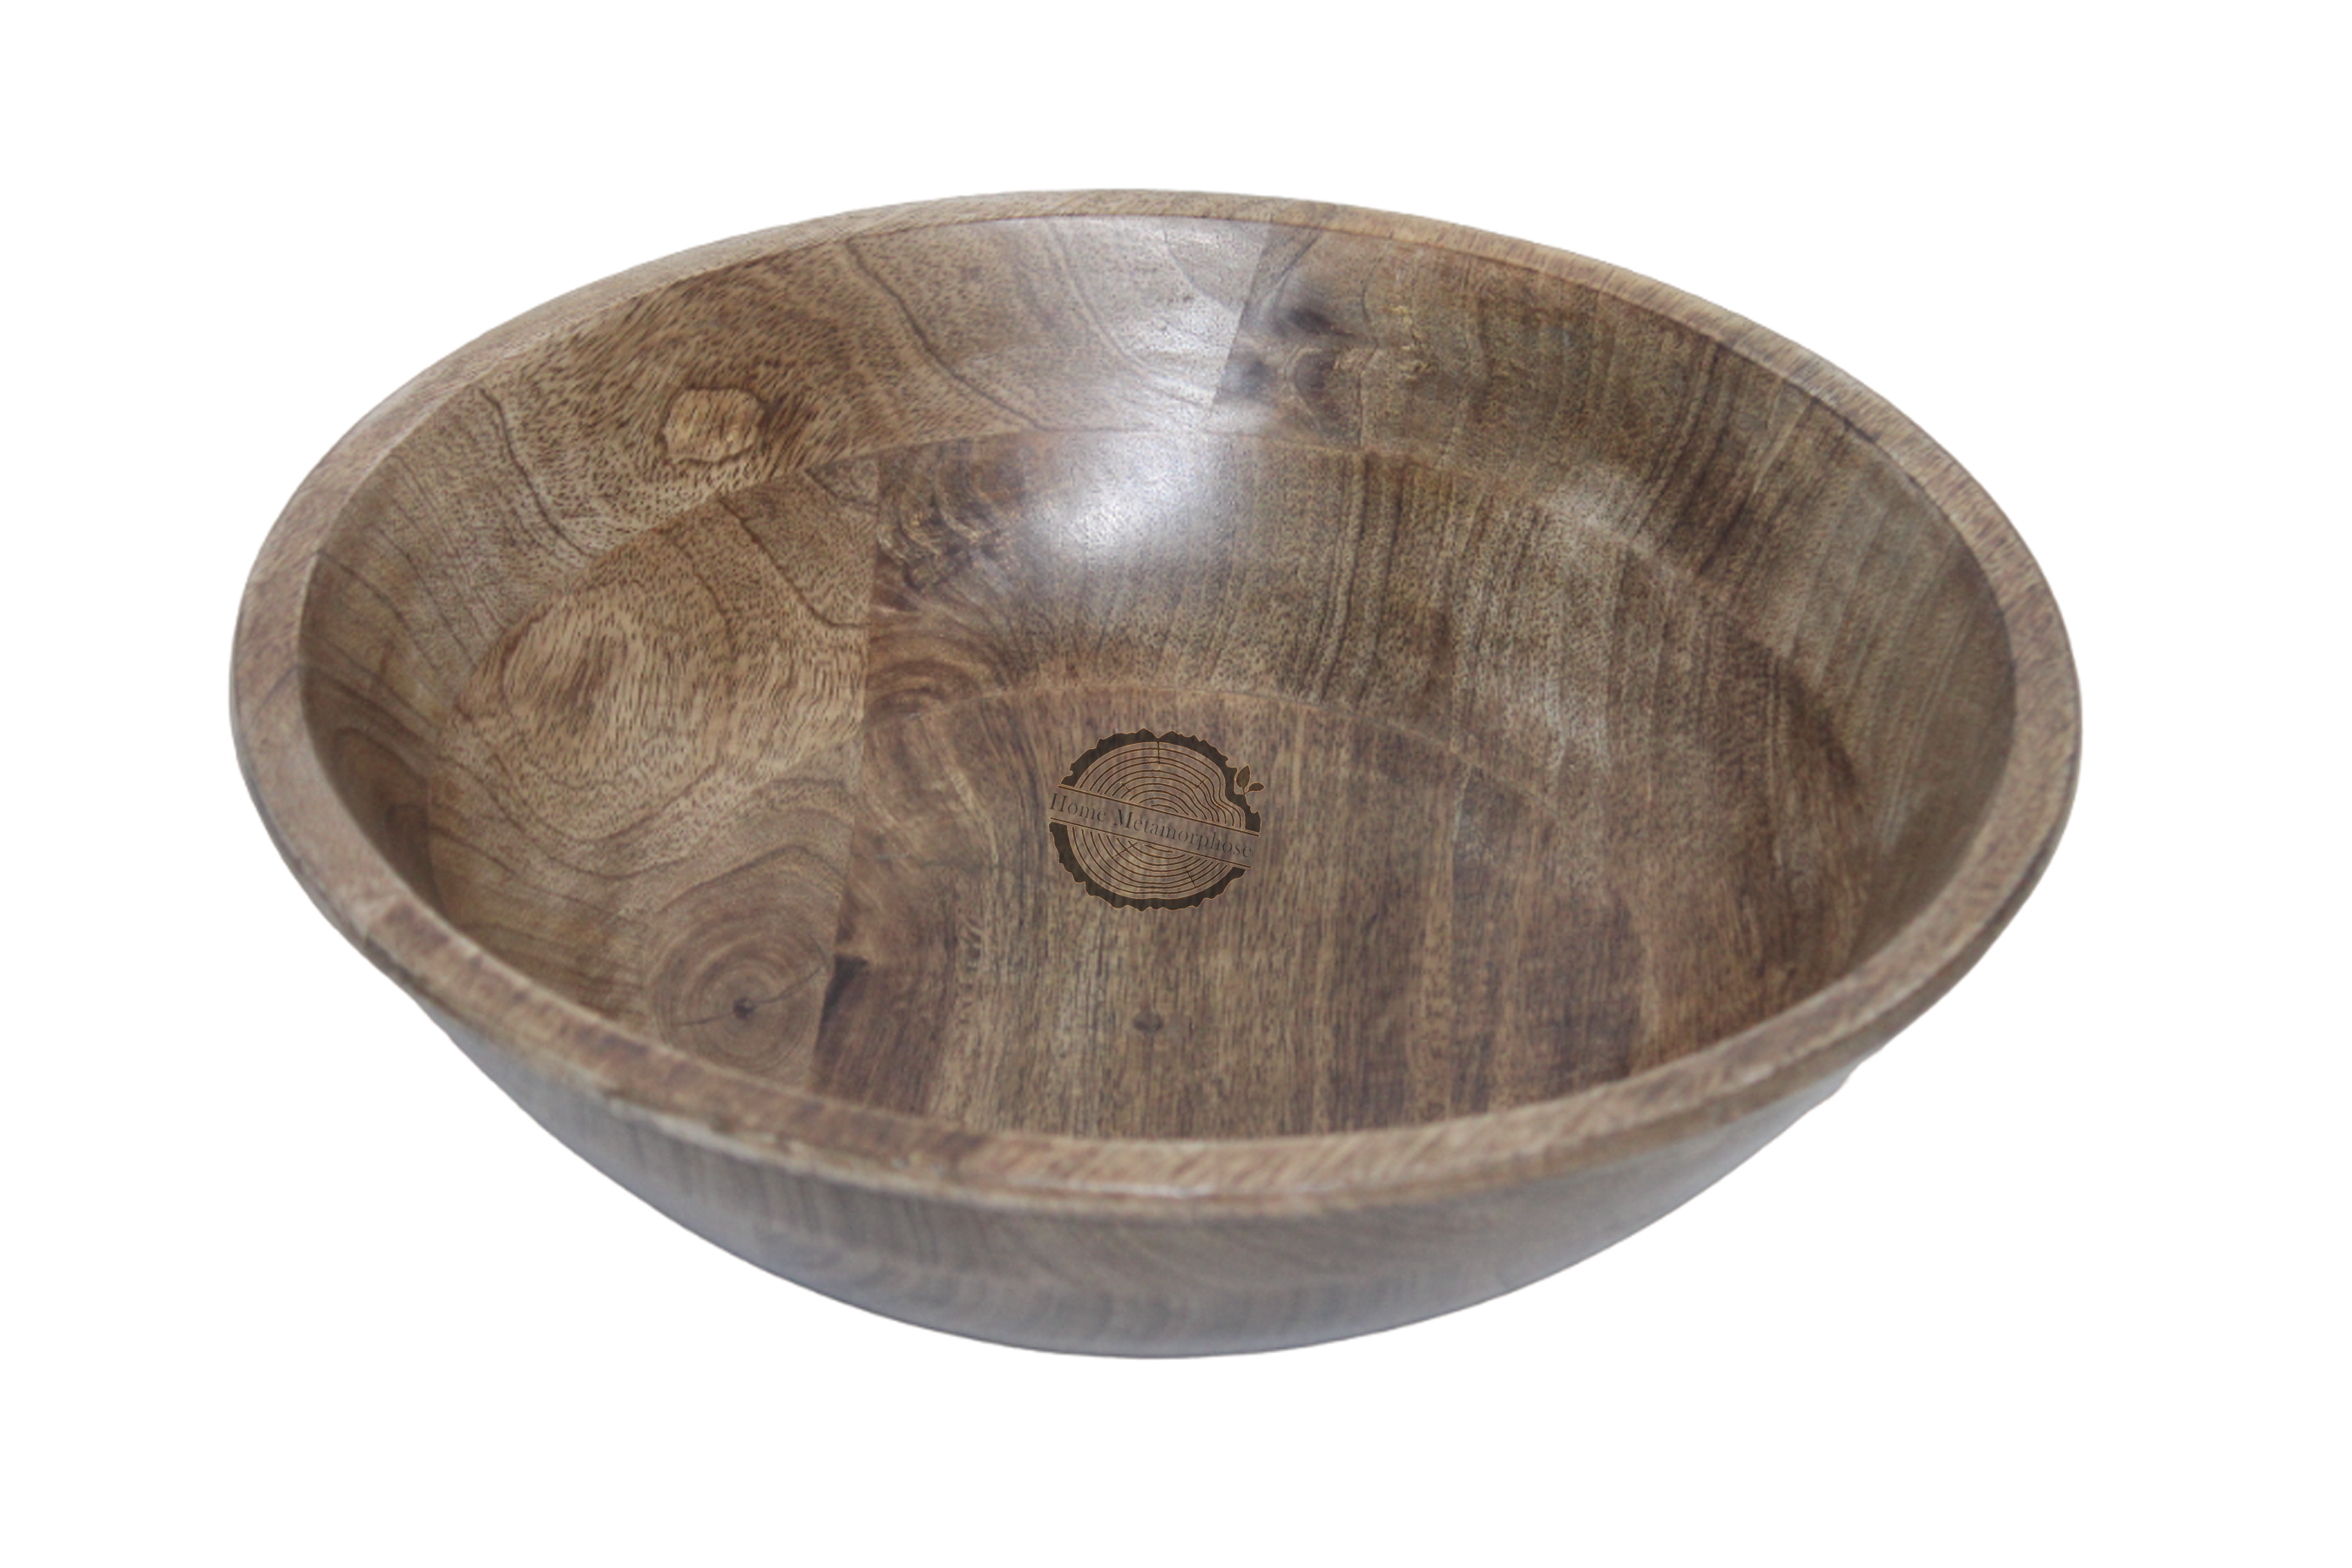 Handmade Wooden Decorative Bowl, Wooden Decorative Round Bowl - Dark Burnt Mango Wood Rustic Bowl - Handmade Decorative Bowls For Home Decor, Bathroom, Kitchen Counter, & More - Large Wood Bowl For Decor, Cosmetics, And Keys